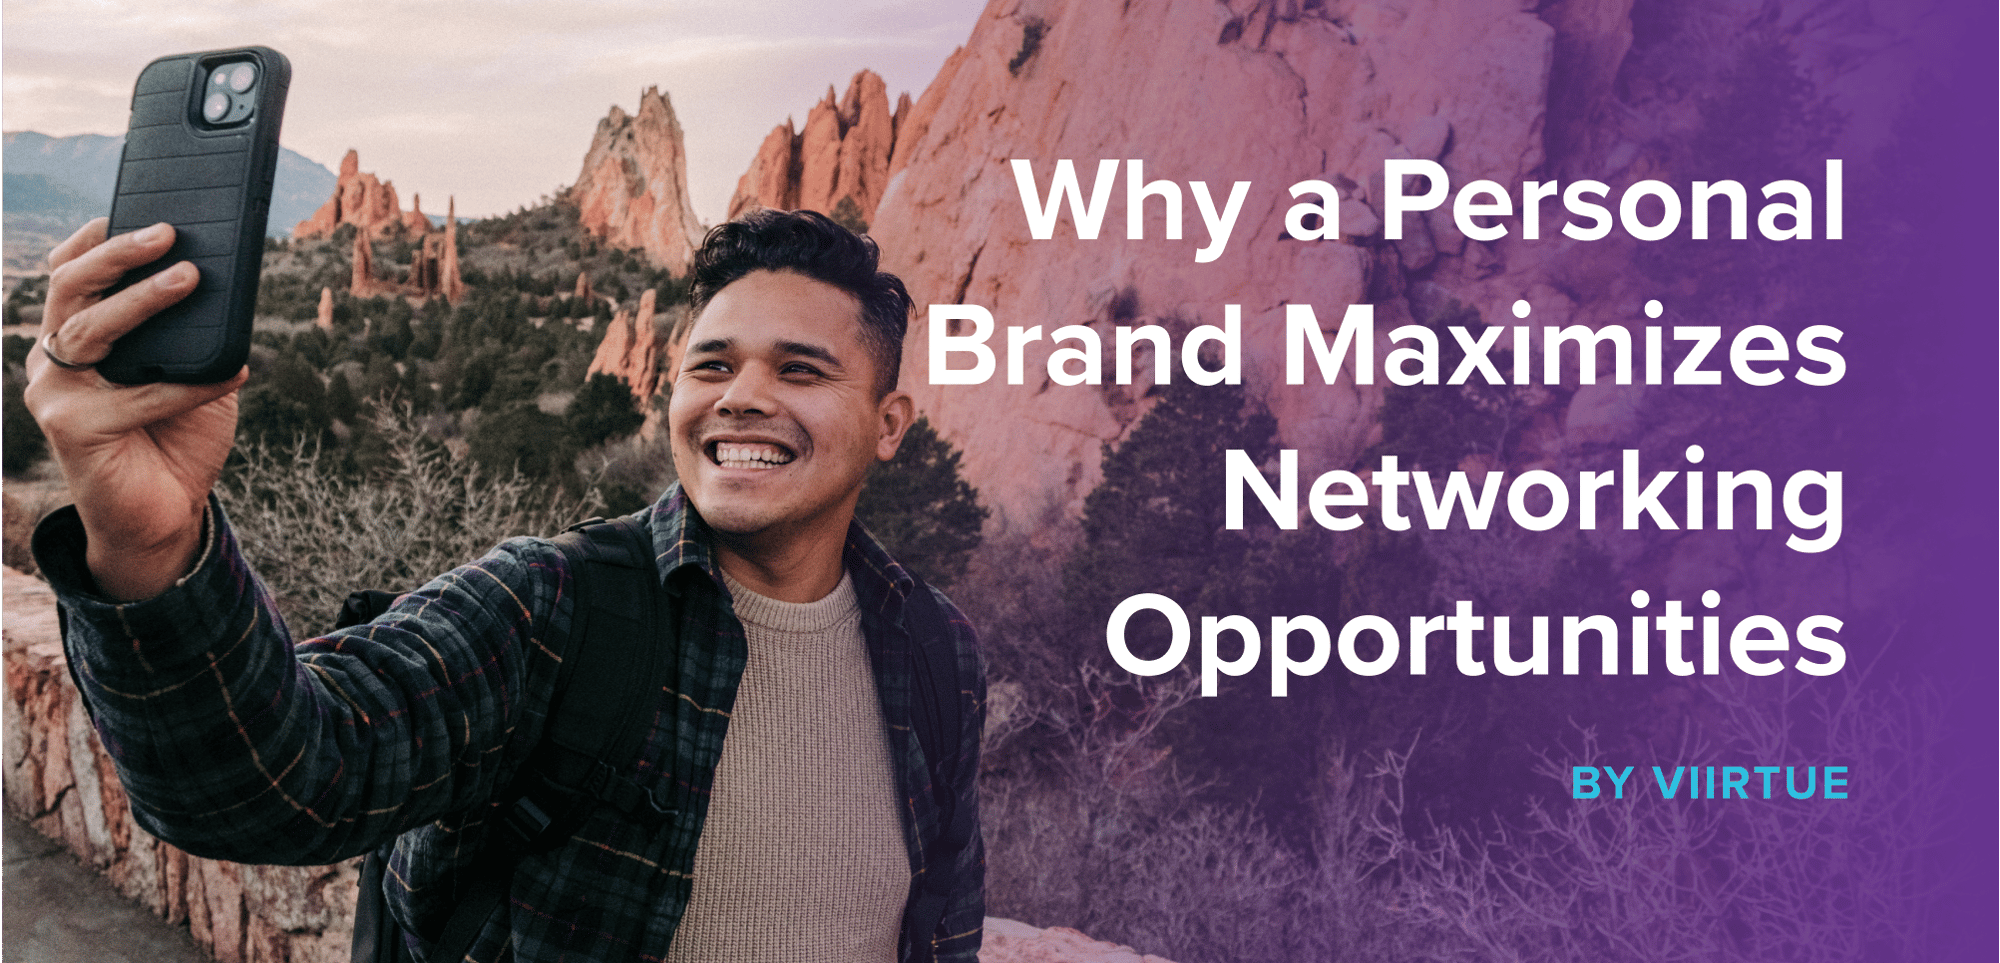 Why a Personal Brand Maximizes Networking Opportunities